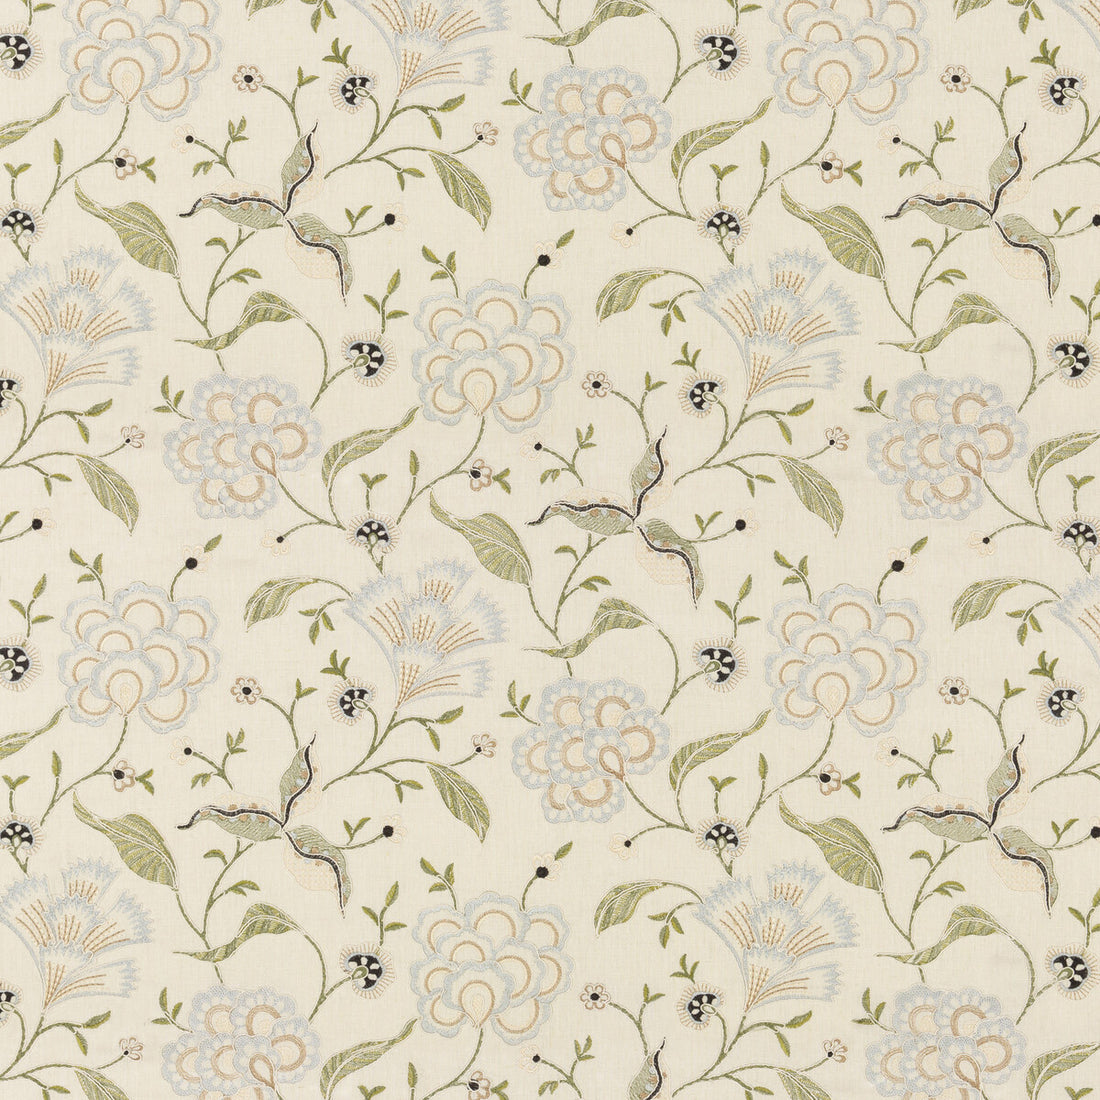 Lamorna Embroidery fabric in linen color - pattern BF10798.1.0 - by G P &amp; J Baker in the Artisan II collection